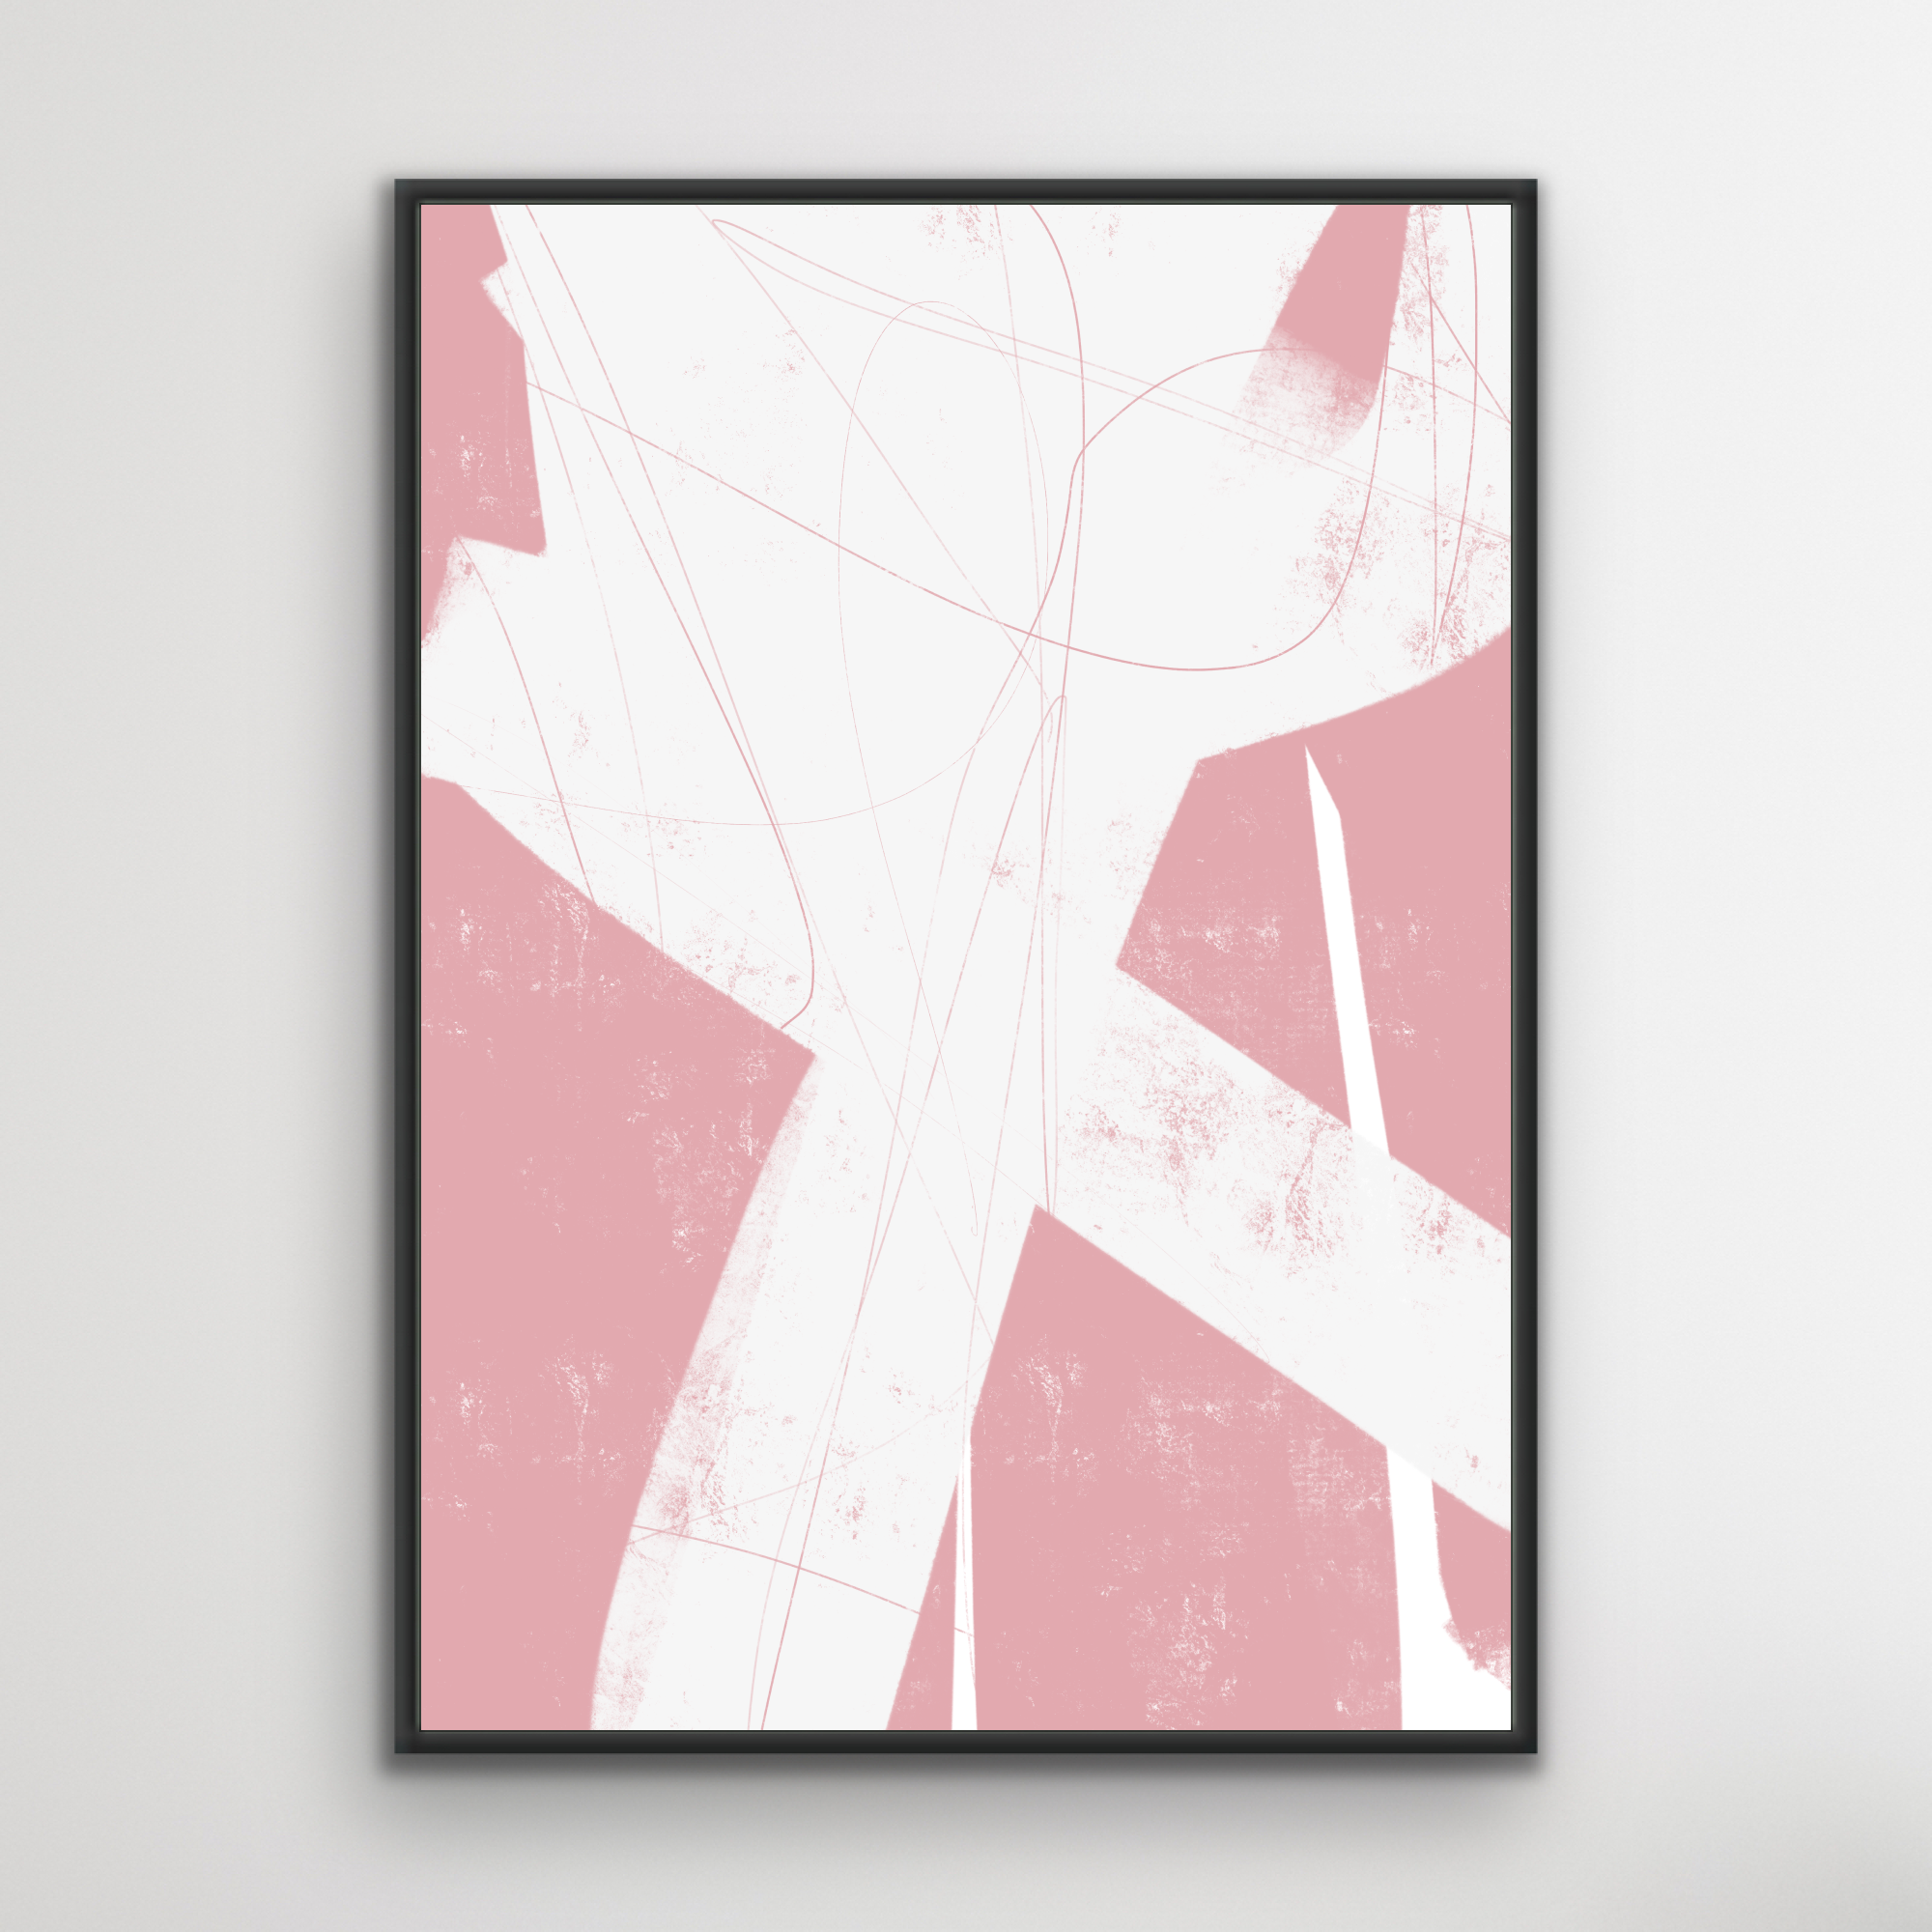 Canvas Print: "All Of The Thoughts #3"